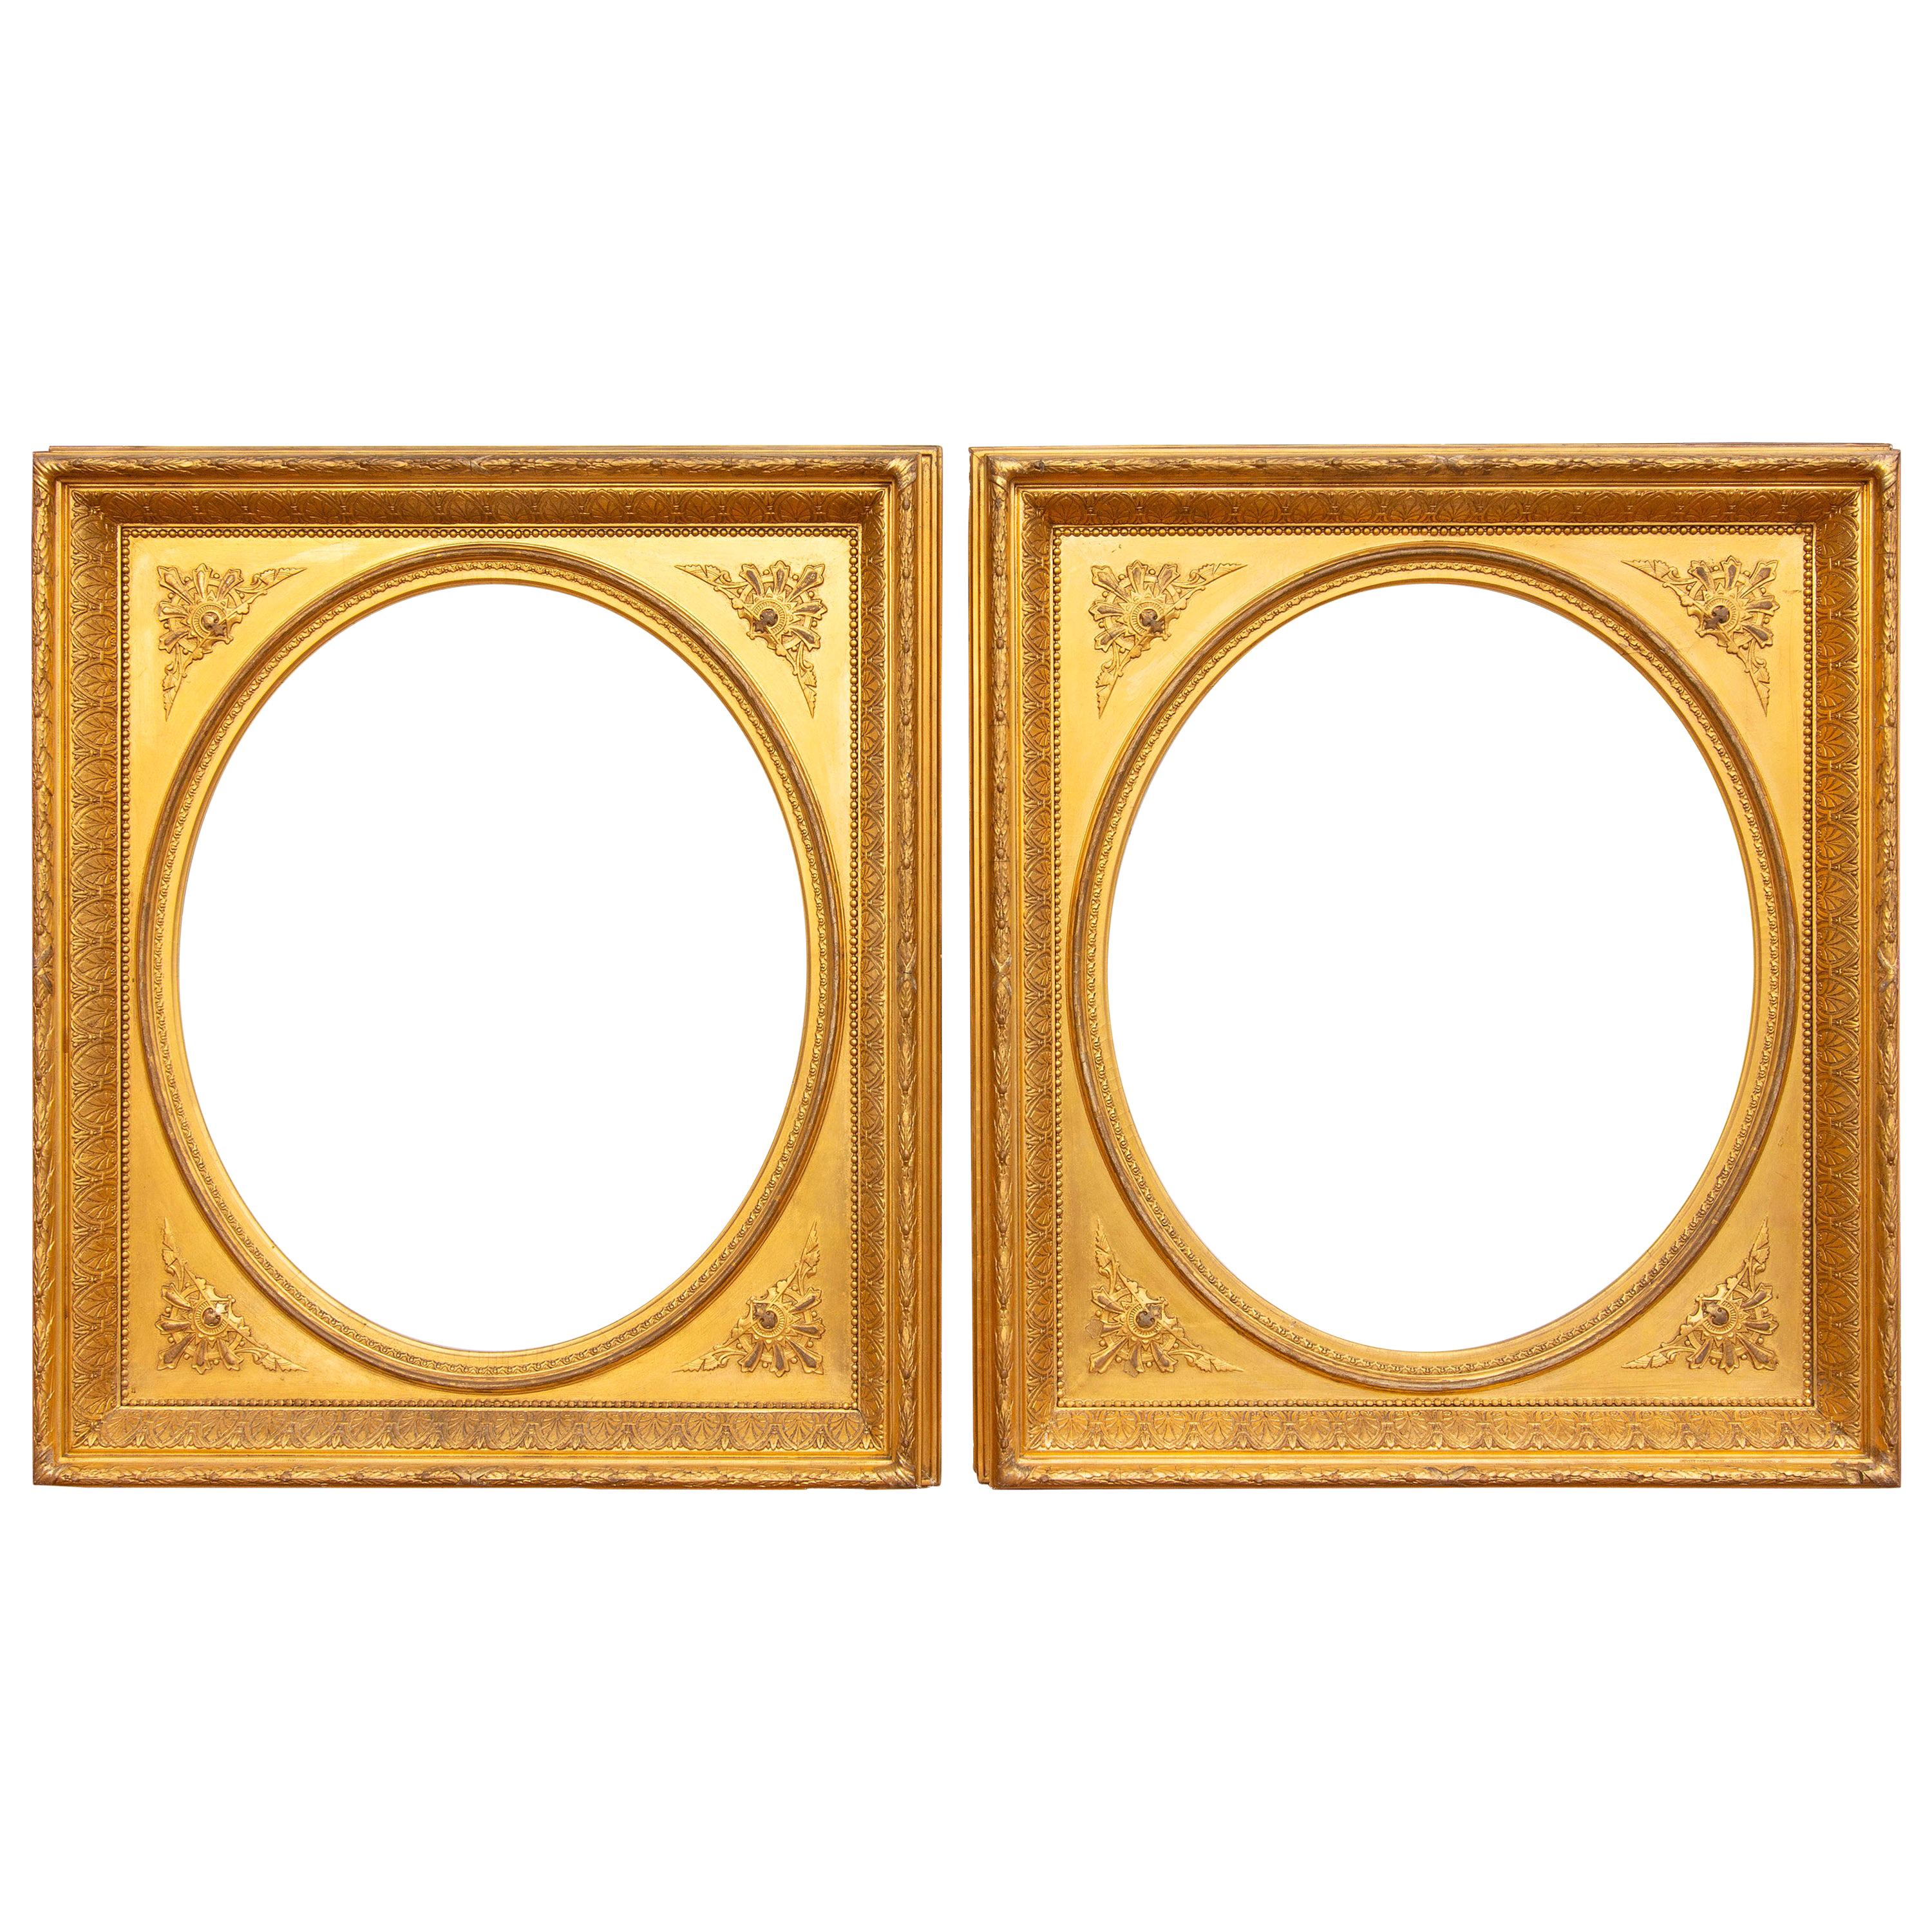 Pair of 19th Century Giltwood Mirrors